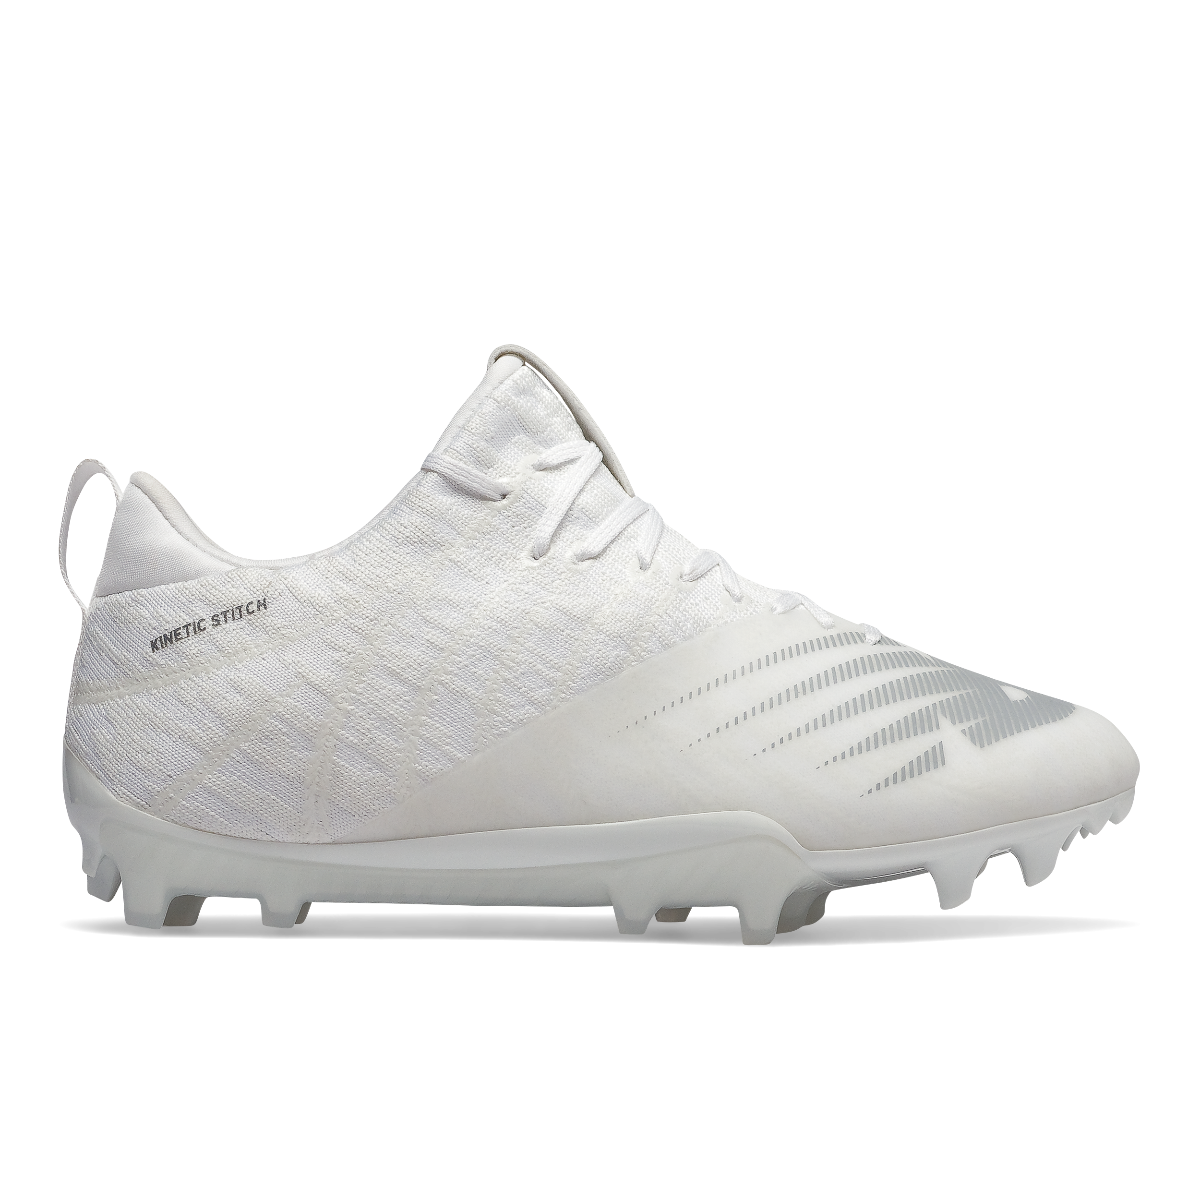 cleats for women's